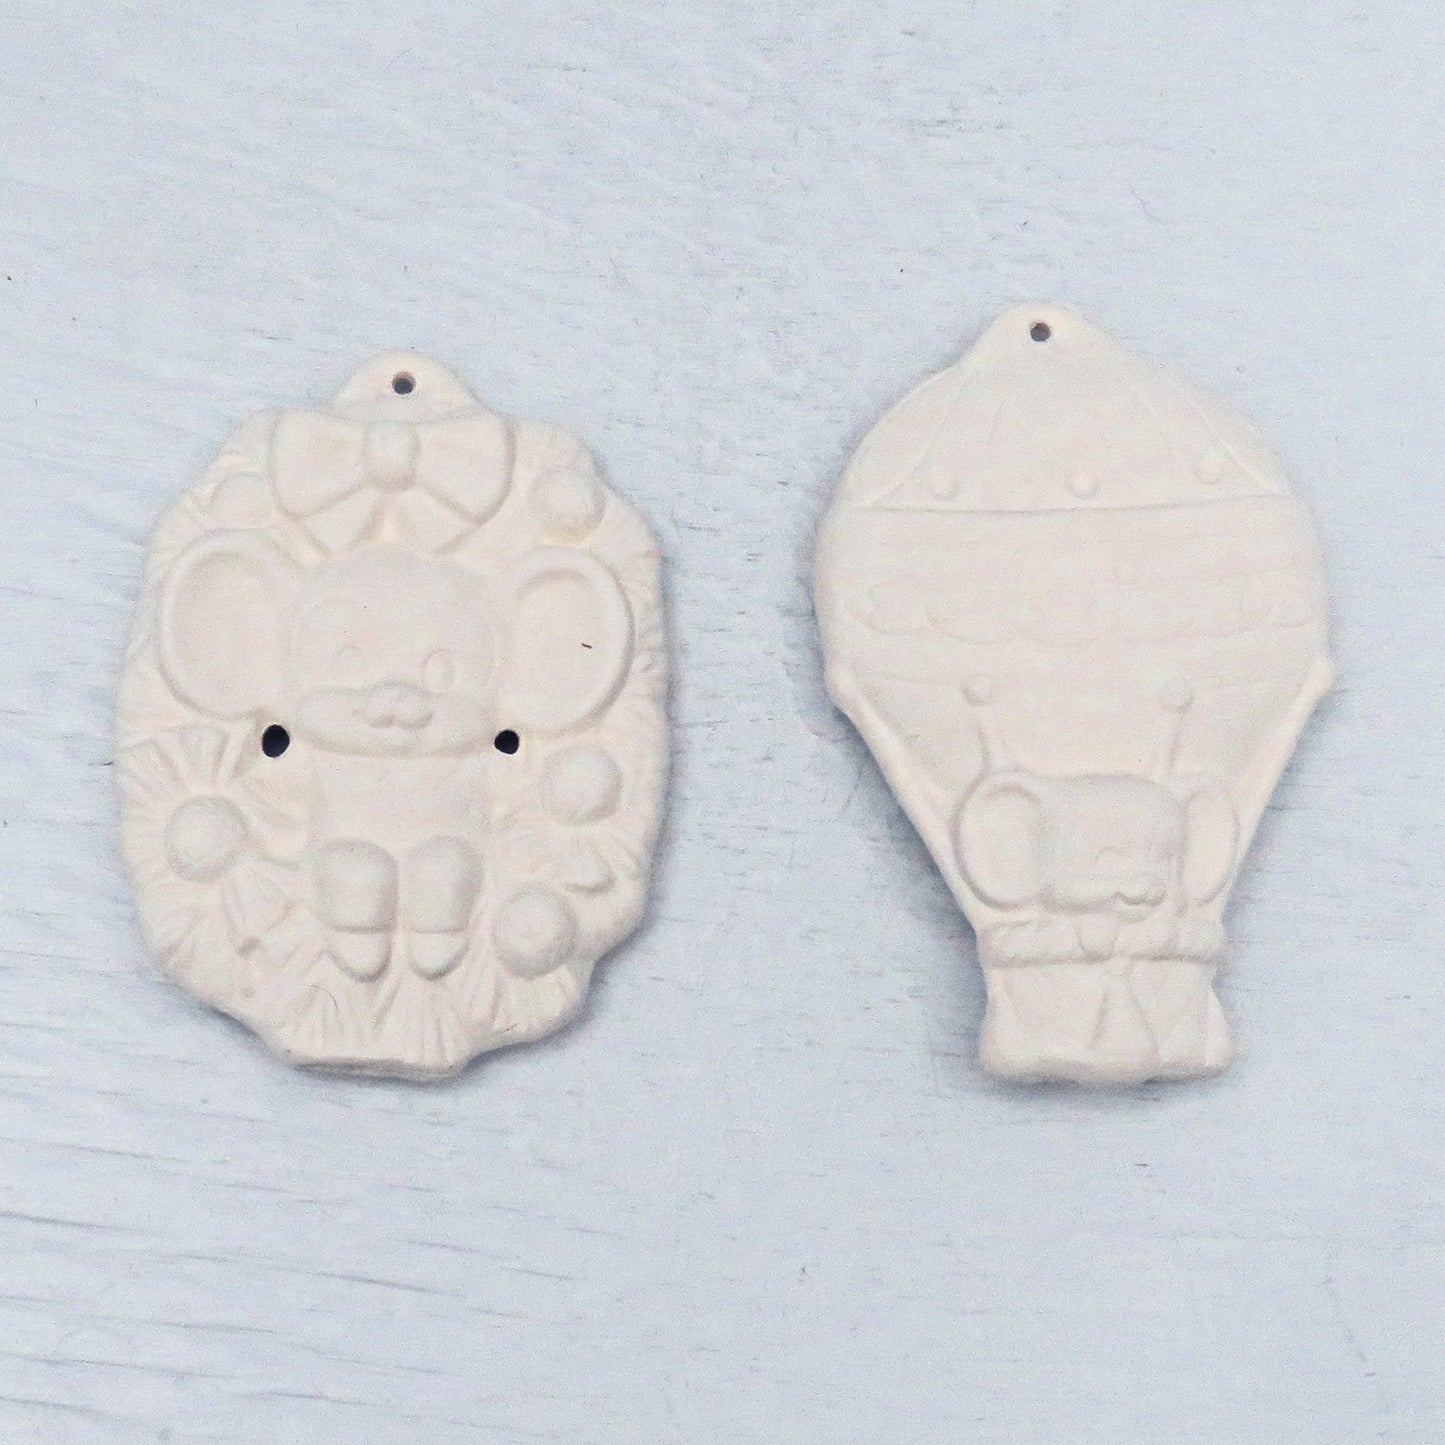 Handmade Ready to Paint Christmas Tree Ornaments with Mouse in Wreath and in Hot Air Balloon